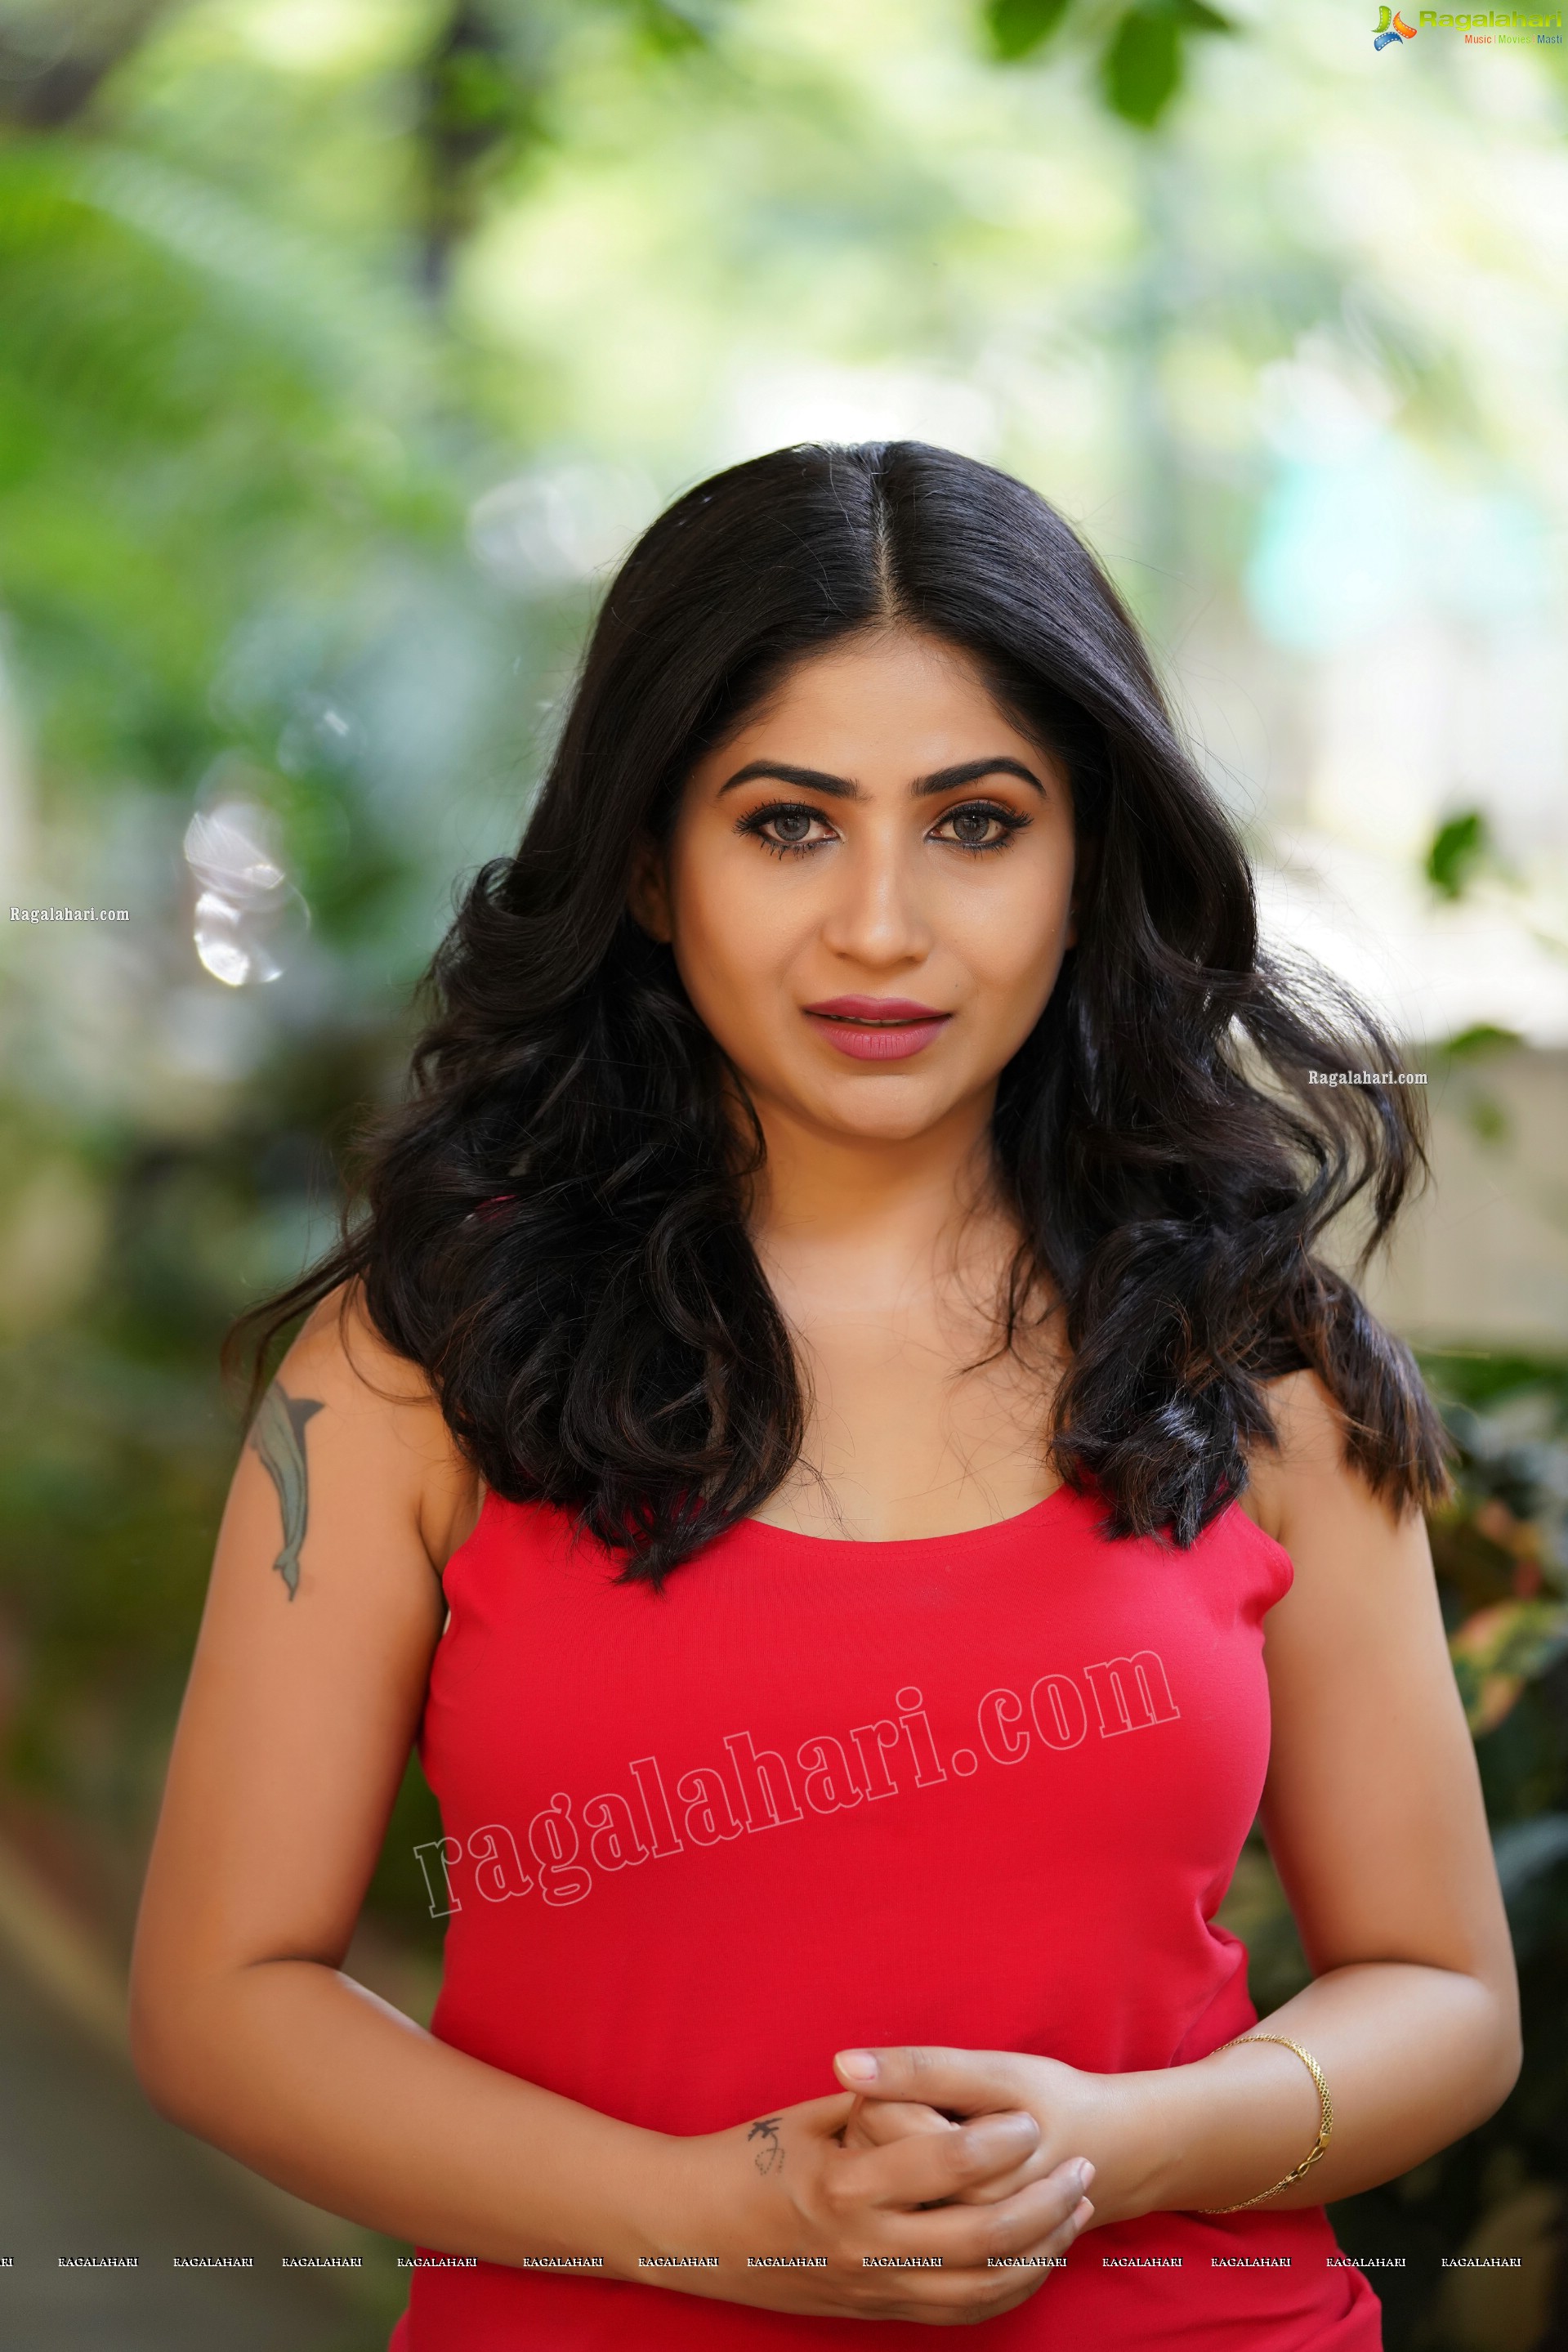 Madhulagna Das in Red Tank Top and Black Jeans, Exclusive Photoshoot